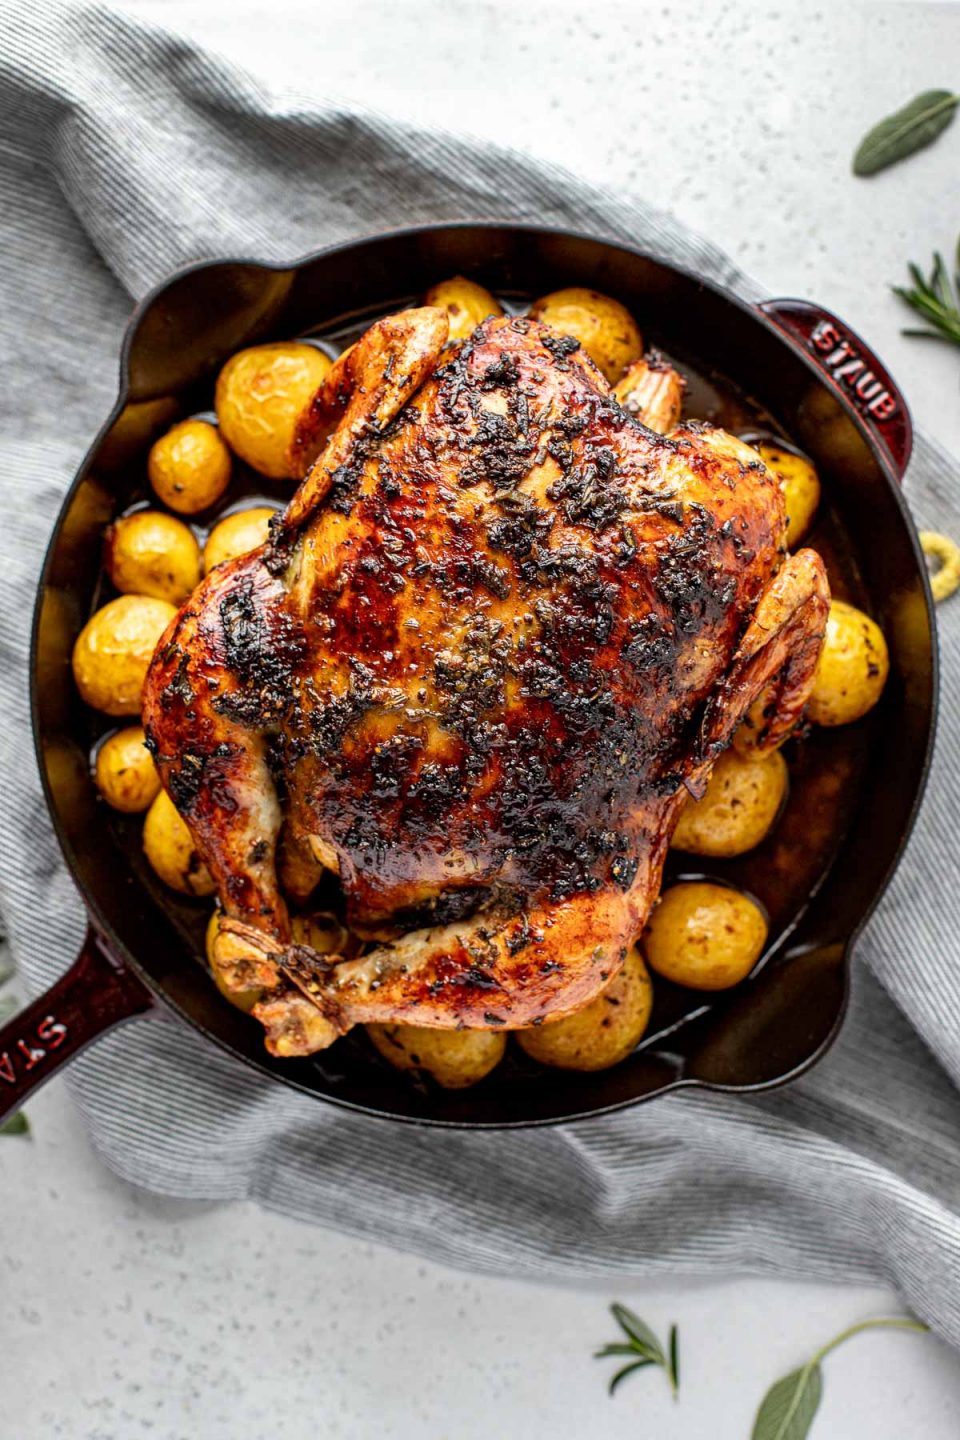 An overhead shot of a finished roasted Thanksgiving Chicken atop a layer of roasted baby potatoes in a large cast iron skillet sits atop a blue and white striped linen napkin laid out on a lightly colored textured surface. Loose sprigs of fresh herbs surround the skillet in both the foreground and background.